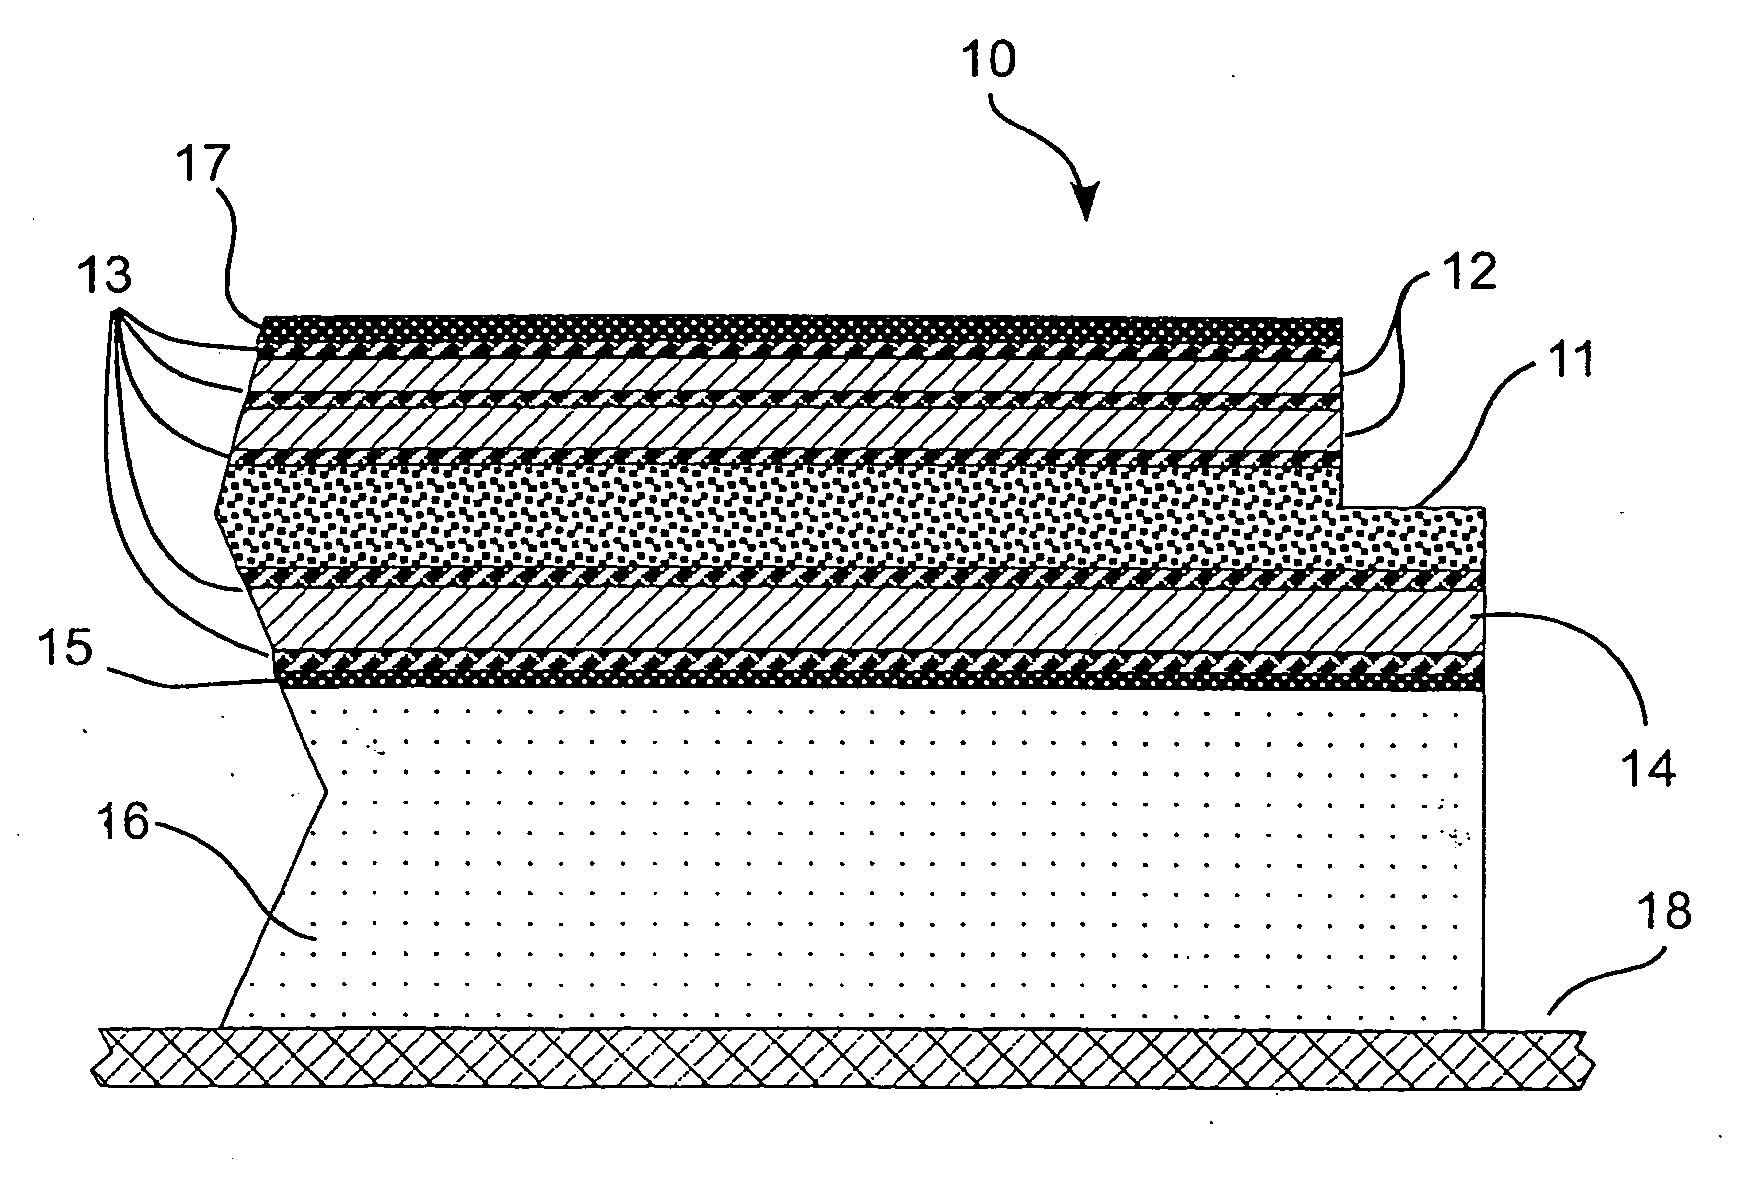 Display module for an electronic device